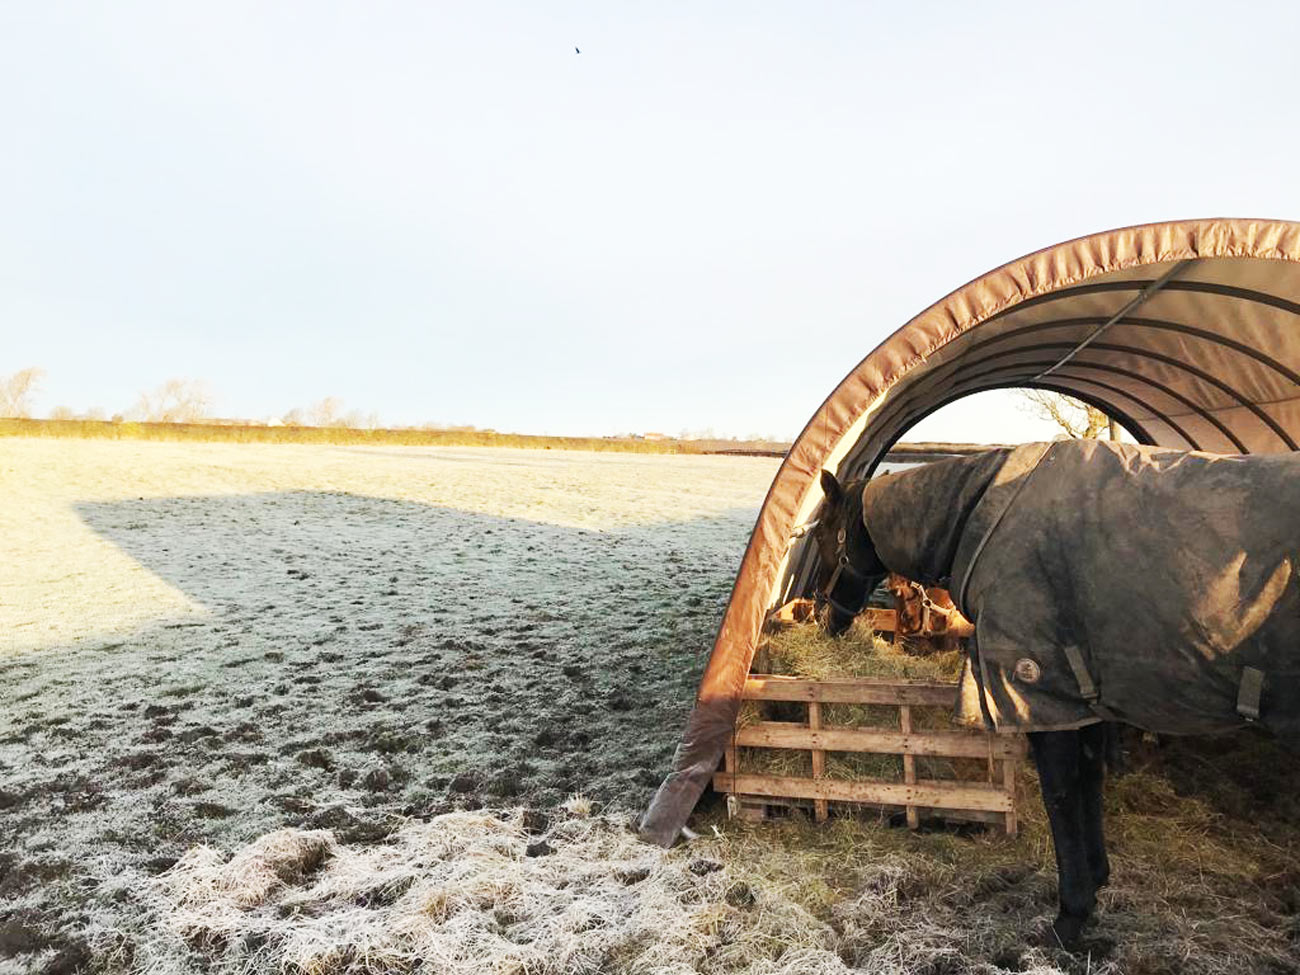 Super cold for an ex-racehorse